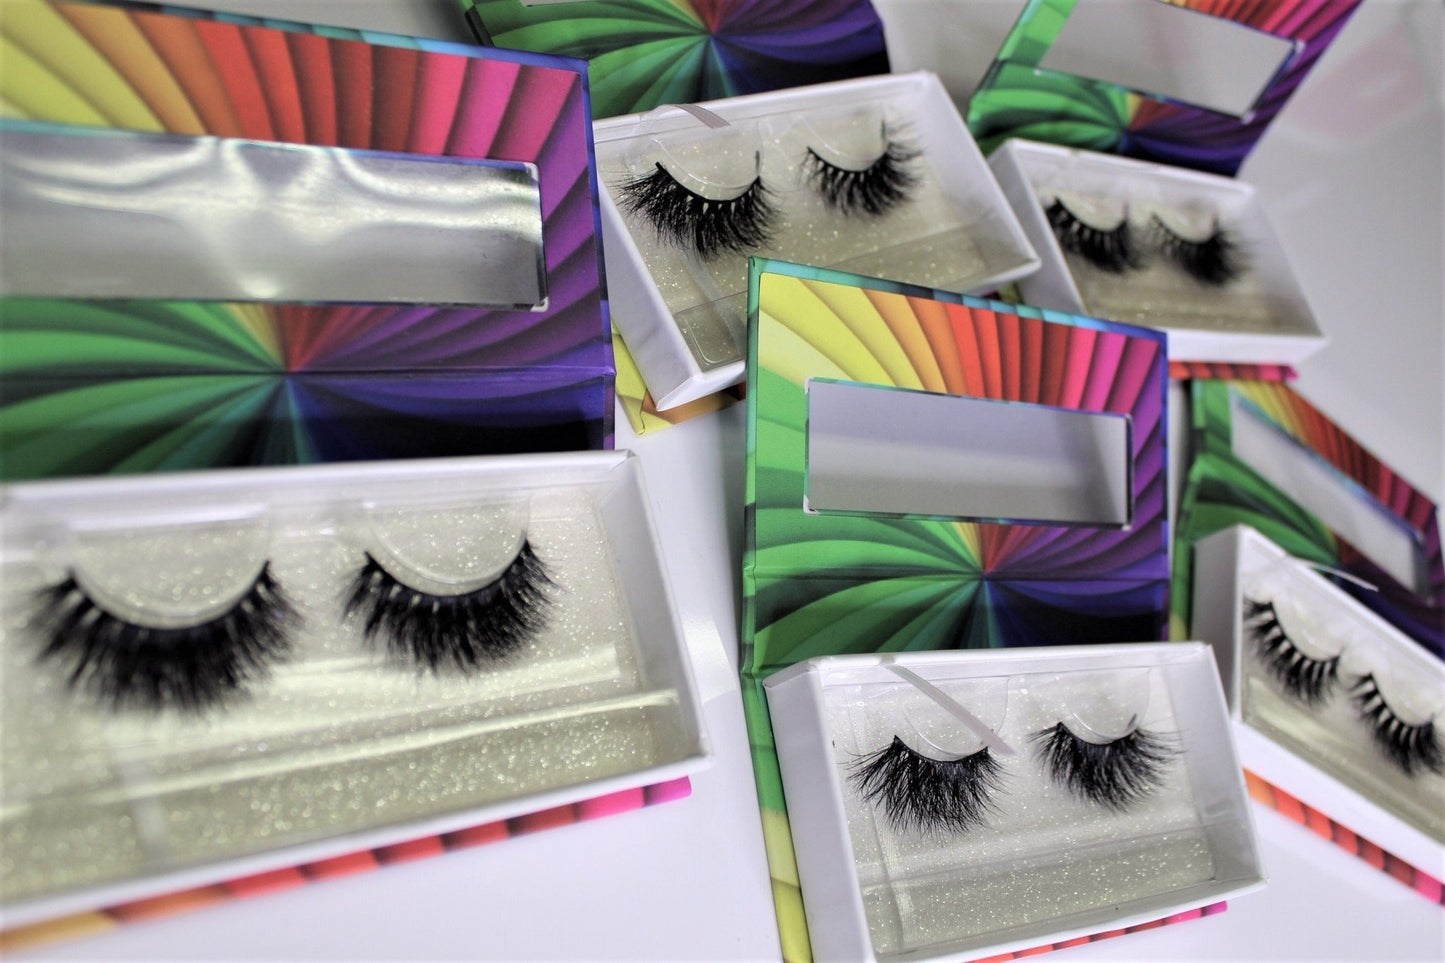 Eyelash Mystery Box - Subscribe & Save - DaizyKat Cosmetics Eyelash Mystery Box - Subscribe & Save DaizyKat Cosmetics Monthly Subscription